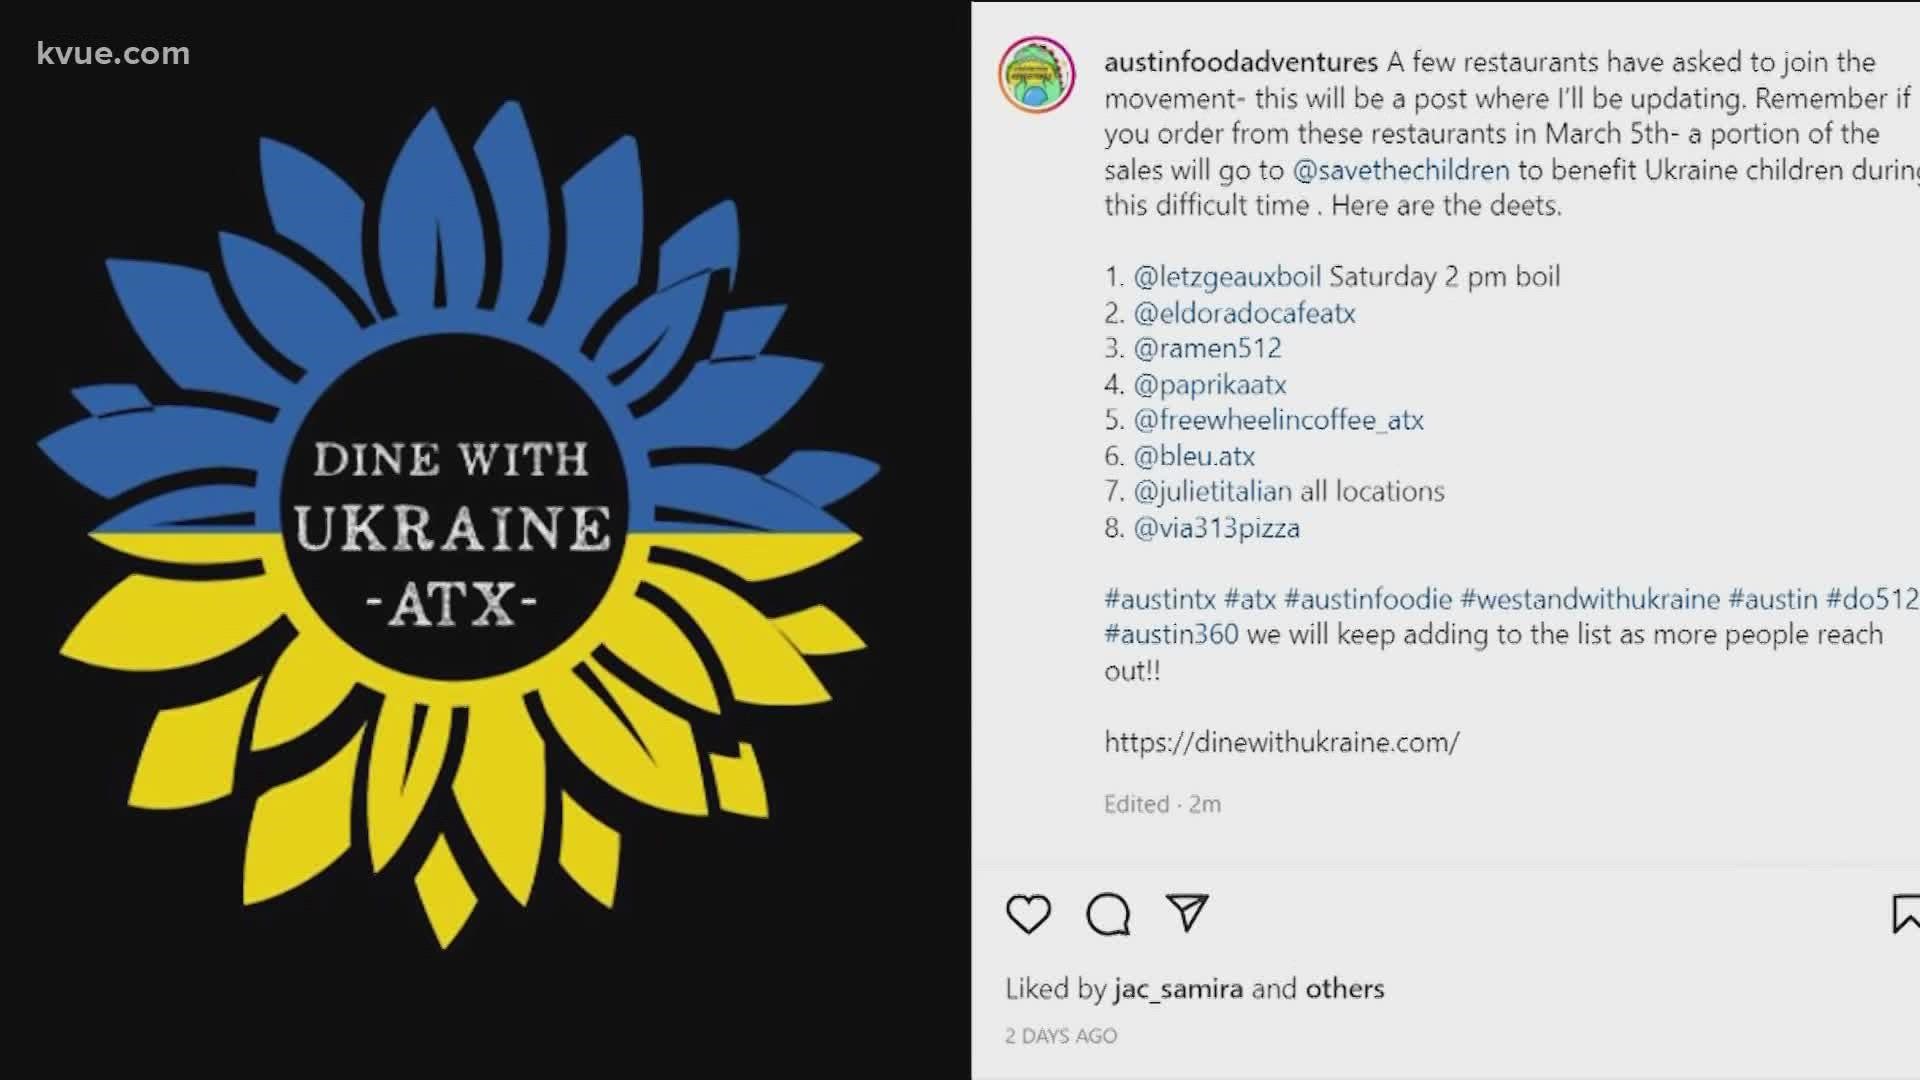 Amanda Wong is teaming up with many local restaurants to raise money for Ukraine this weekend with participating businesses pledging to donate some profits.